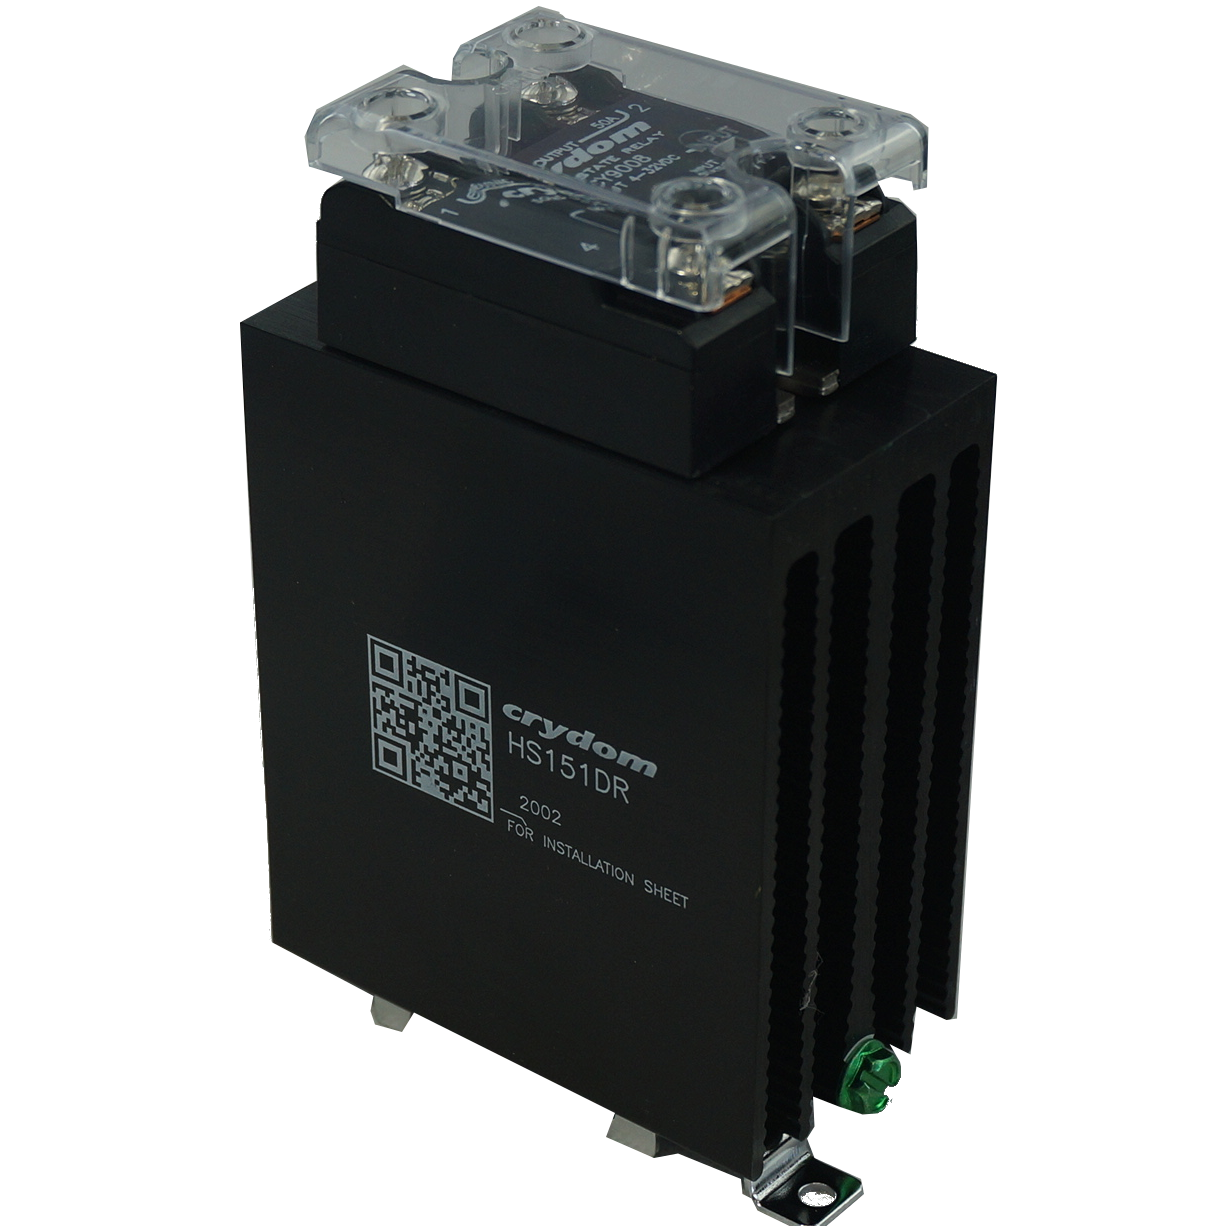 HS151DR-CY9008, Panel or Din Rail Mount Solid State Relay 3-32VDC Control Input, 48-660VAC Output, 40 Amps w/LED Indicator